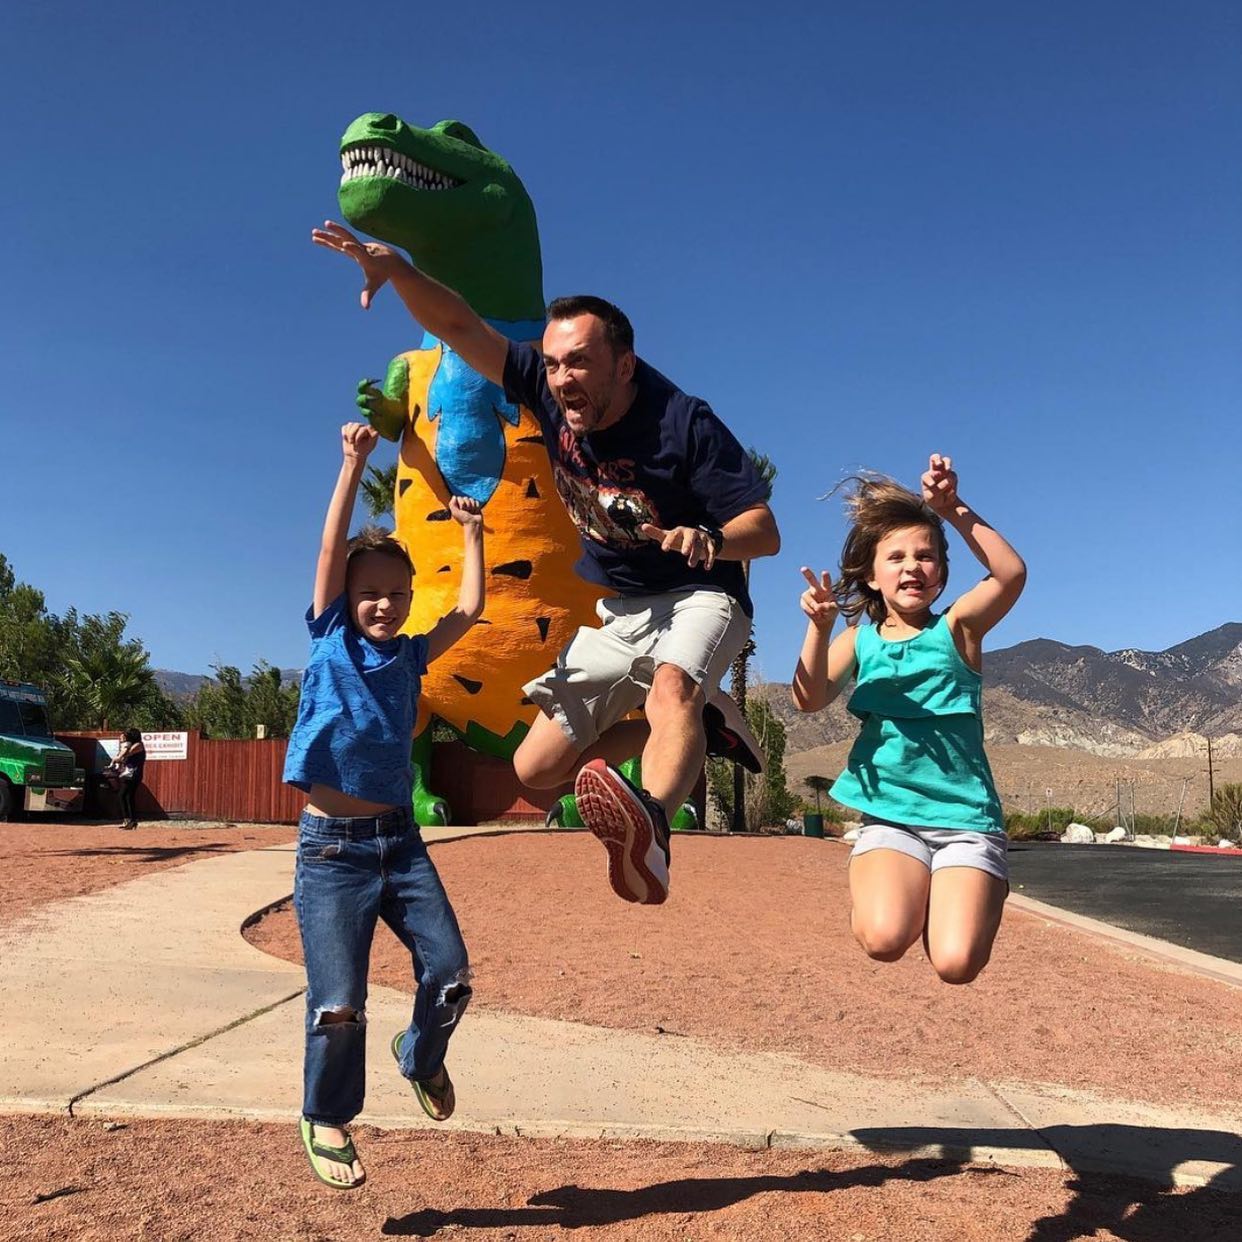 World's Biggest Dinosaurs Sculptures: world record set by the Cabazon Dinosaurs